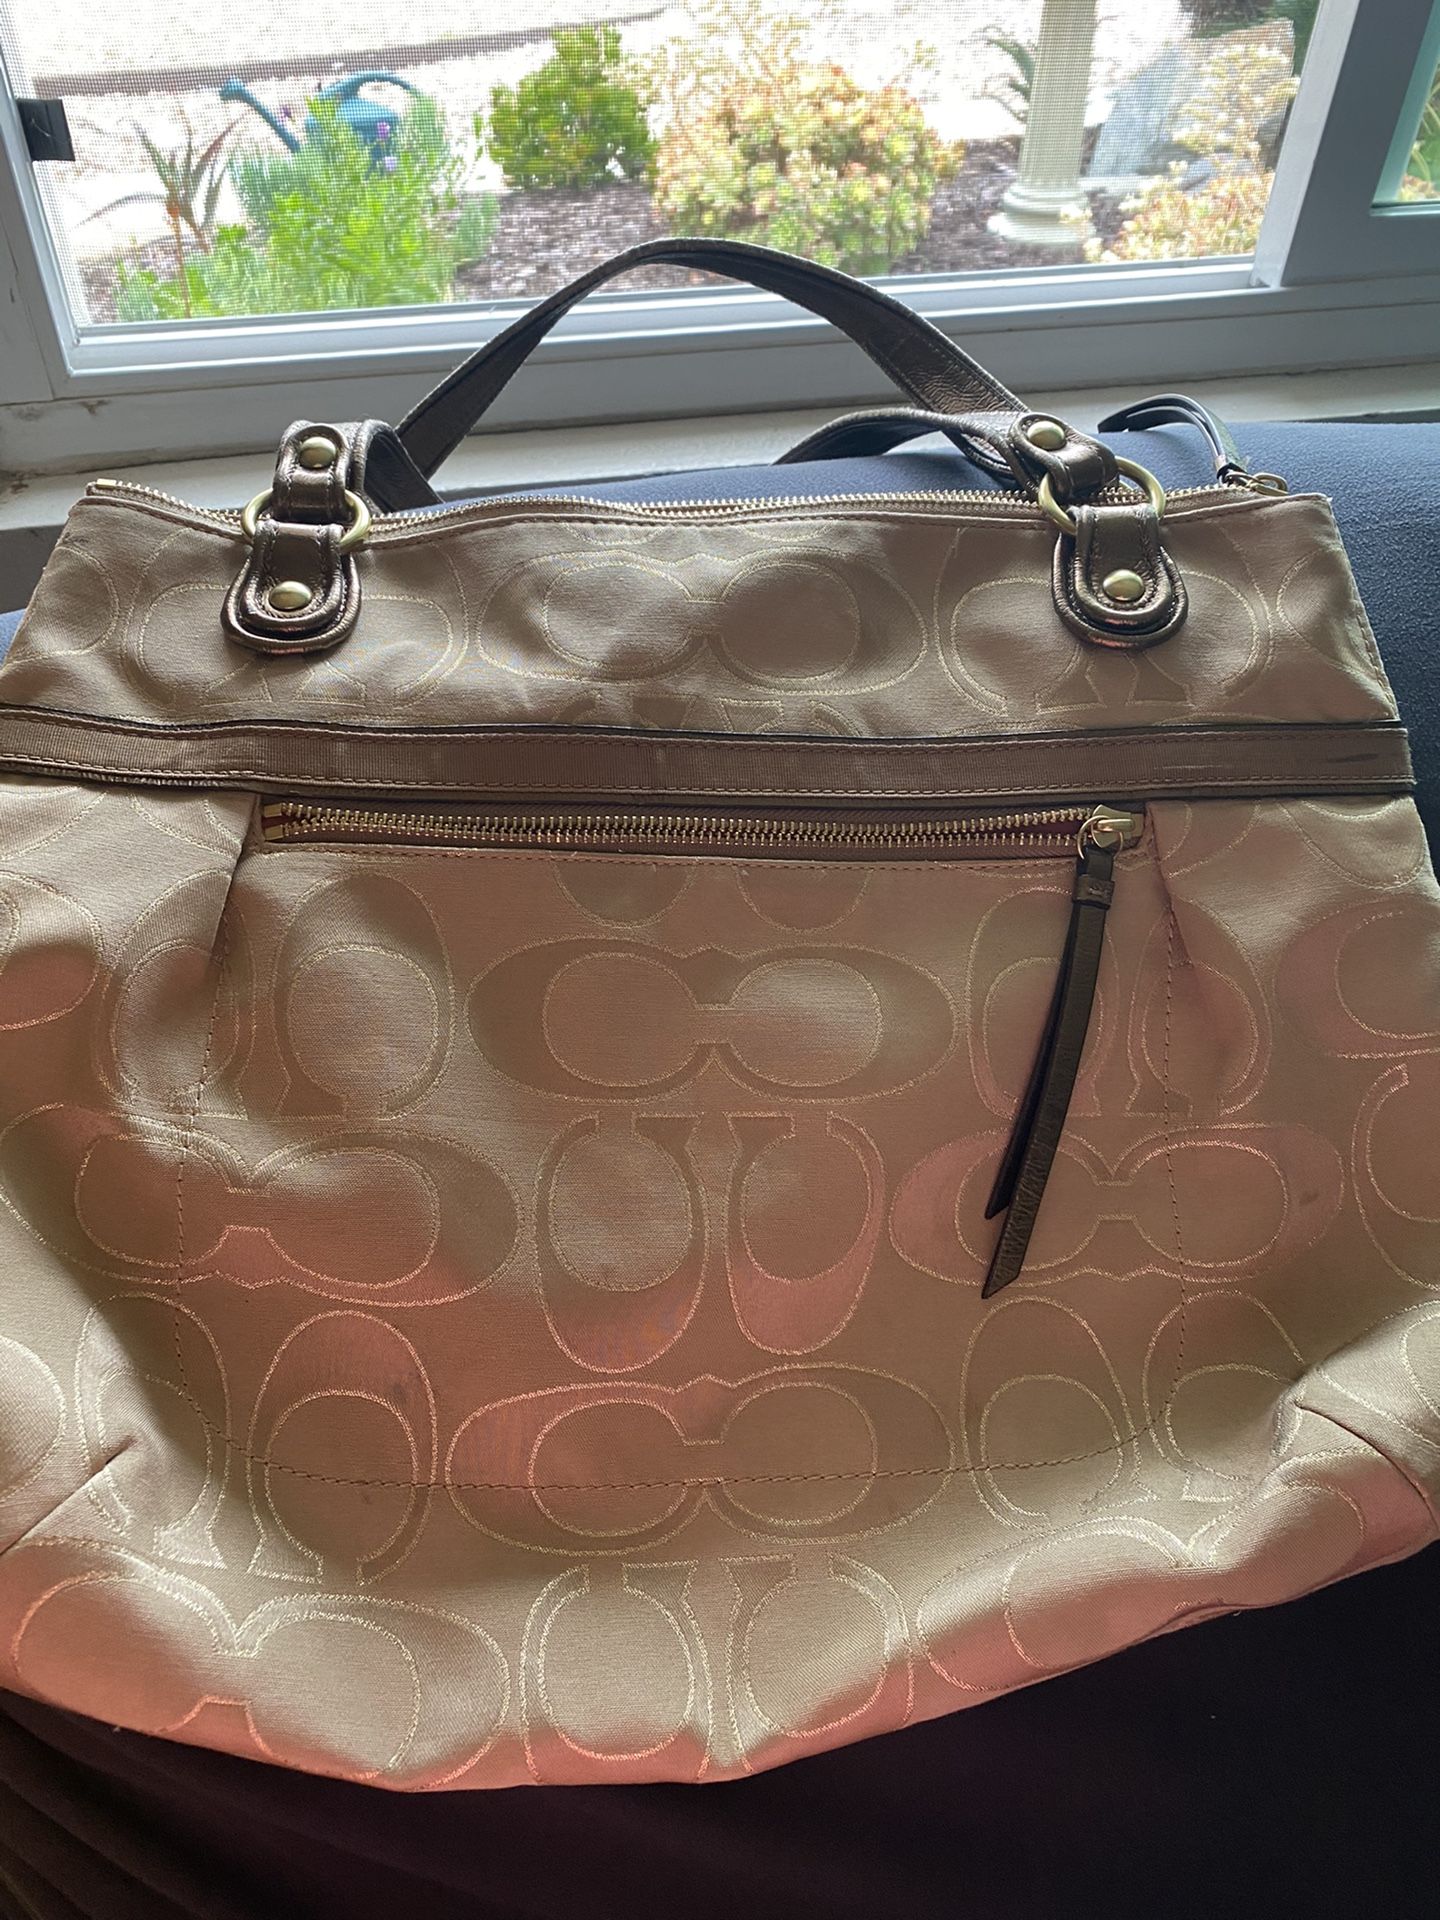 Authentic Coach Purse (Used)